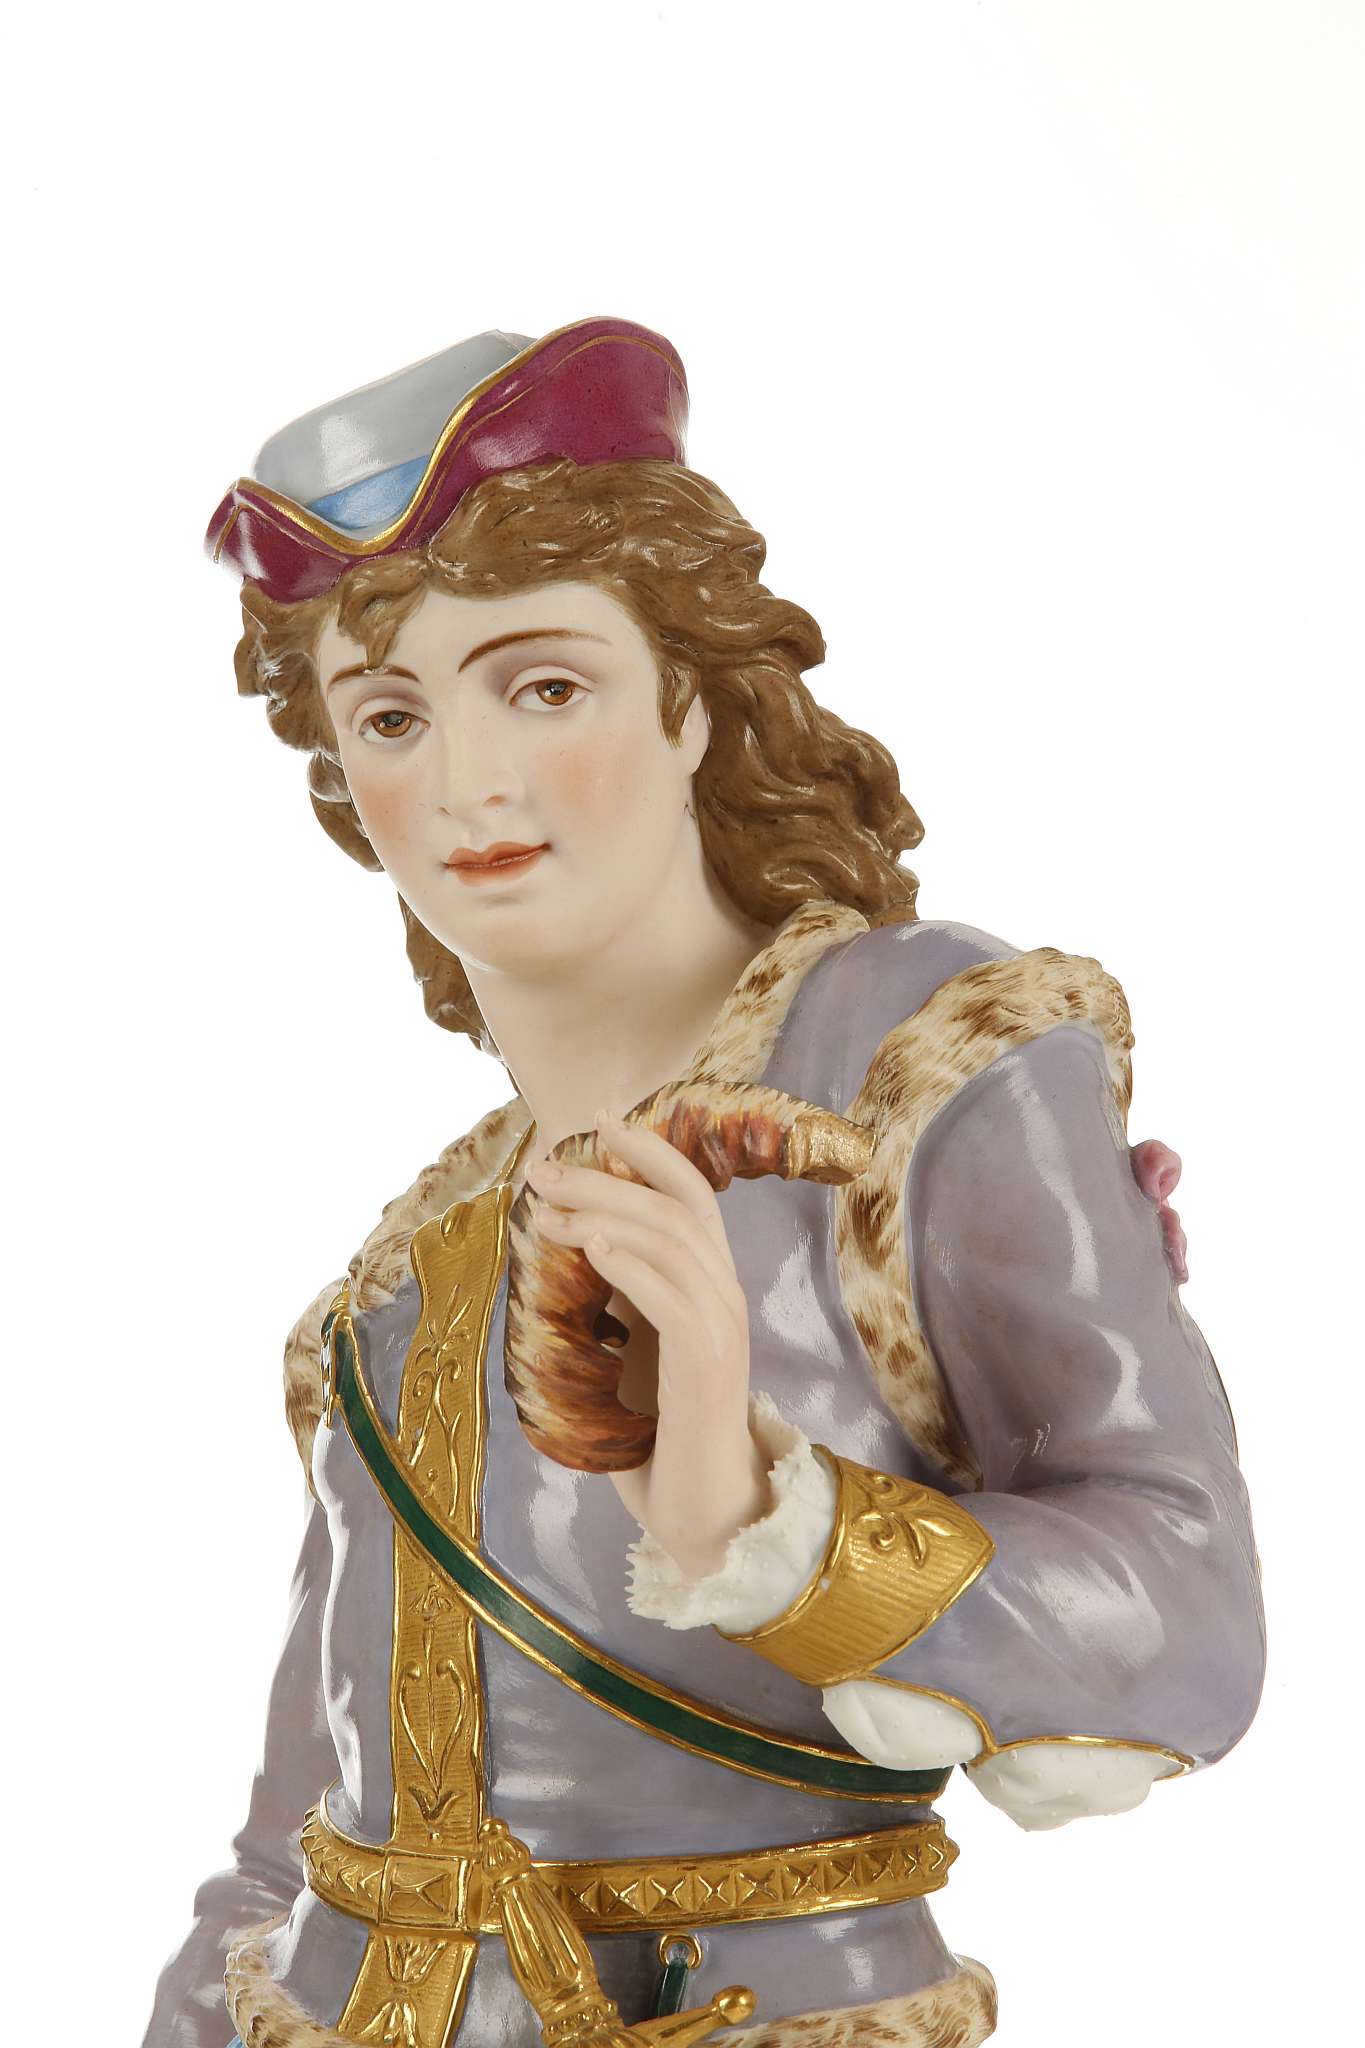 A LARGE FRENCH BISQUE PORCELAIN FIGURE OF A HUNTSMAN, late 19th or early 20th century, modelled - Image 12 of 16